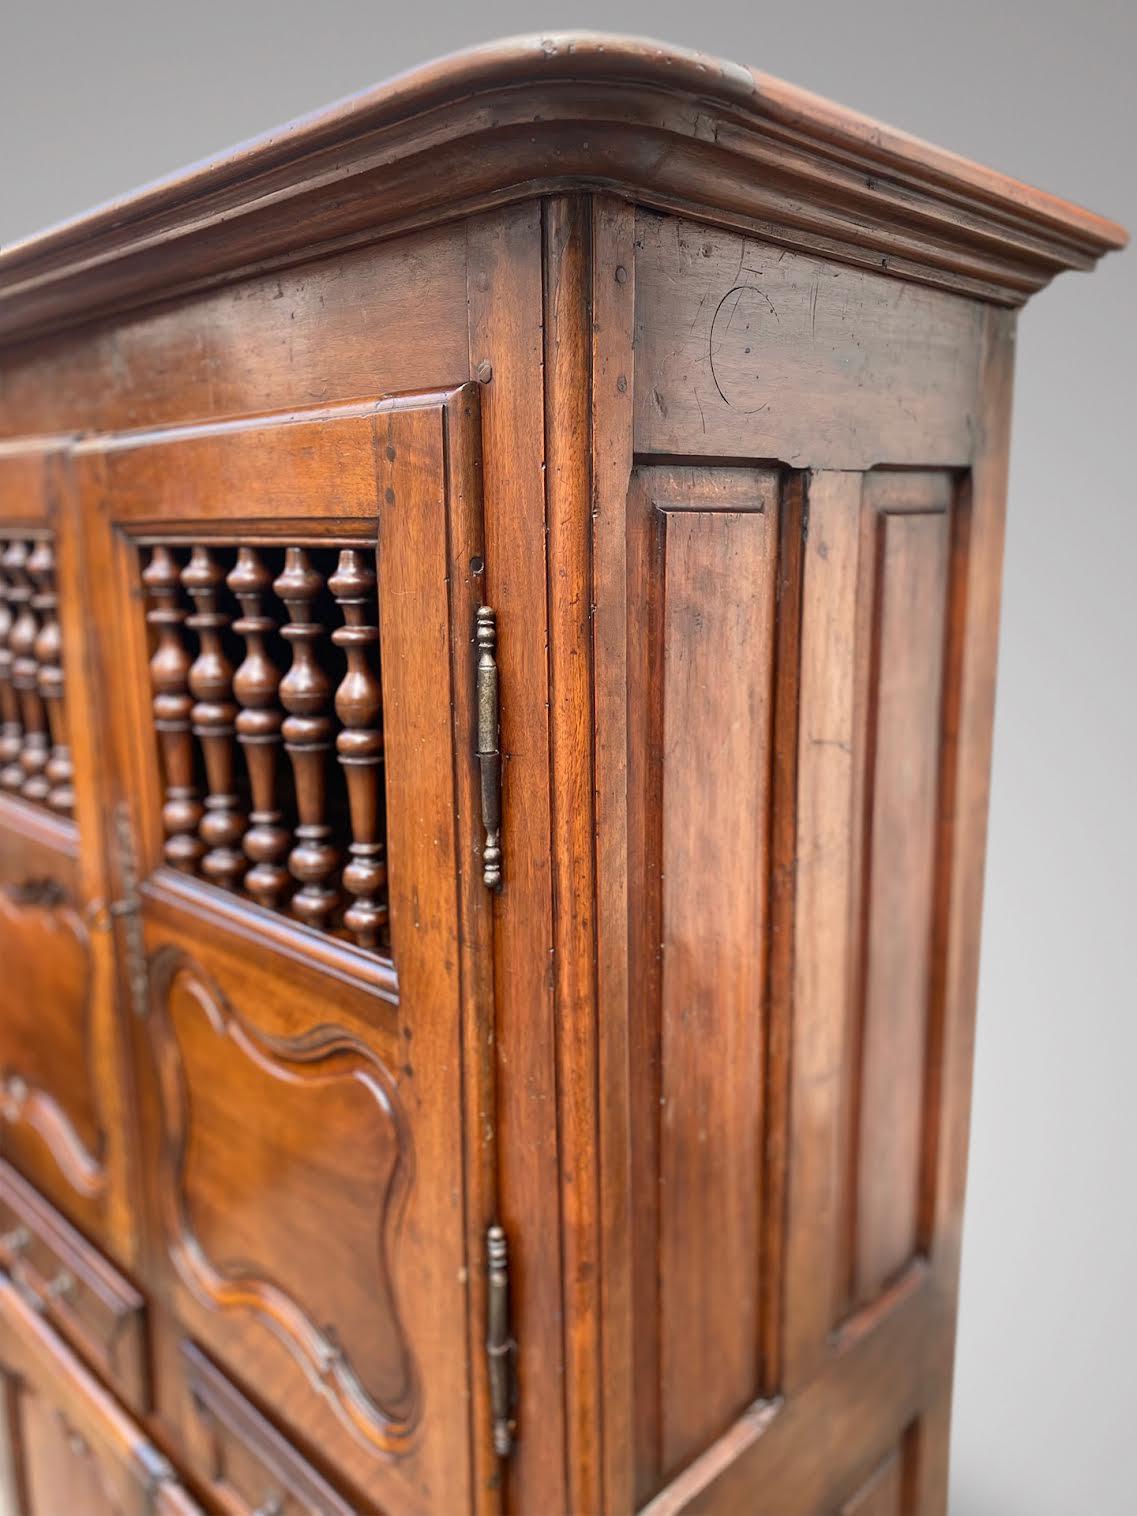 19th Century Stunning French Mangeadou or Pantry in Walnut from the Provence